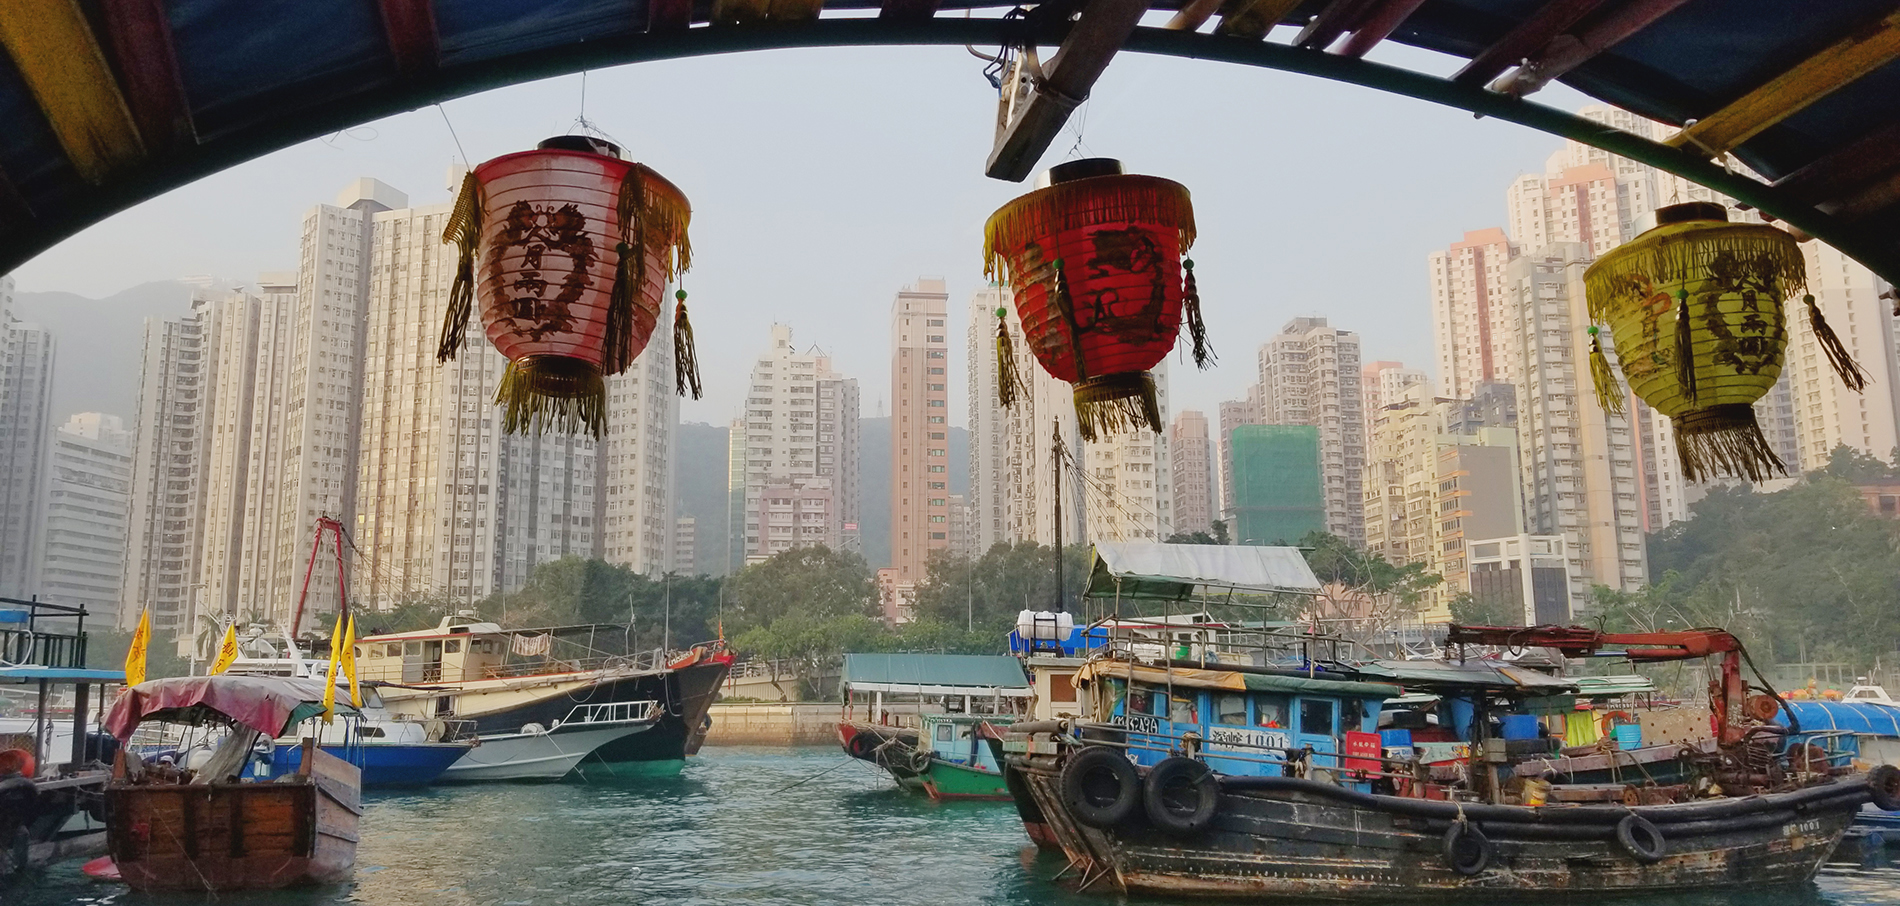 Waterfront in China. Photo by Brittany Savoie.